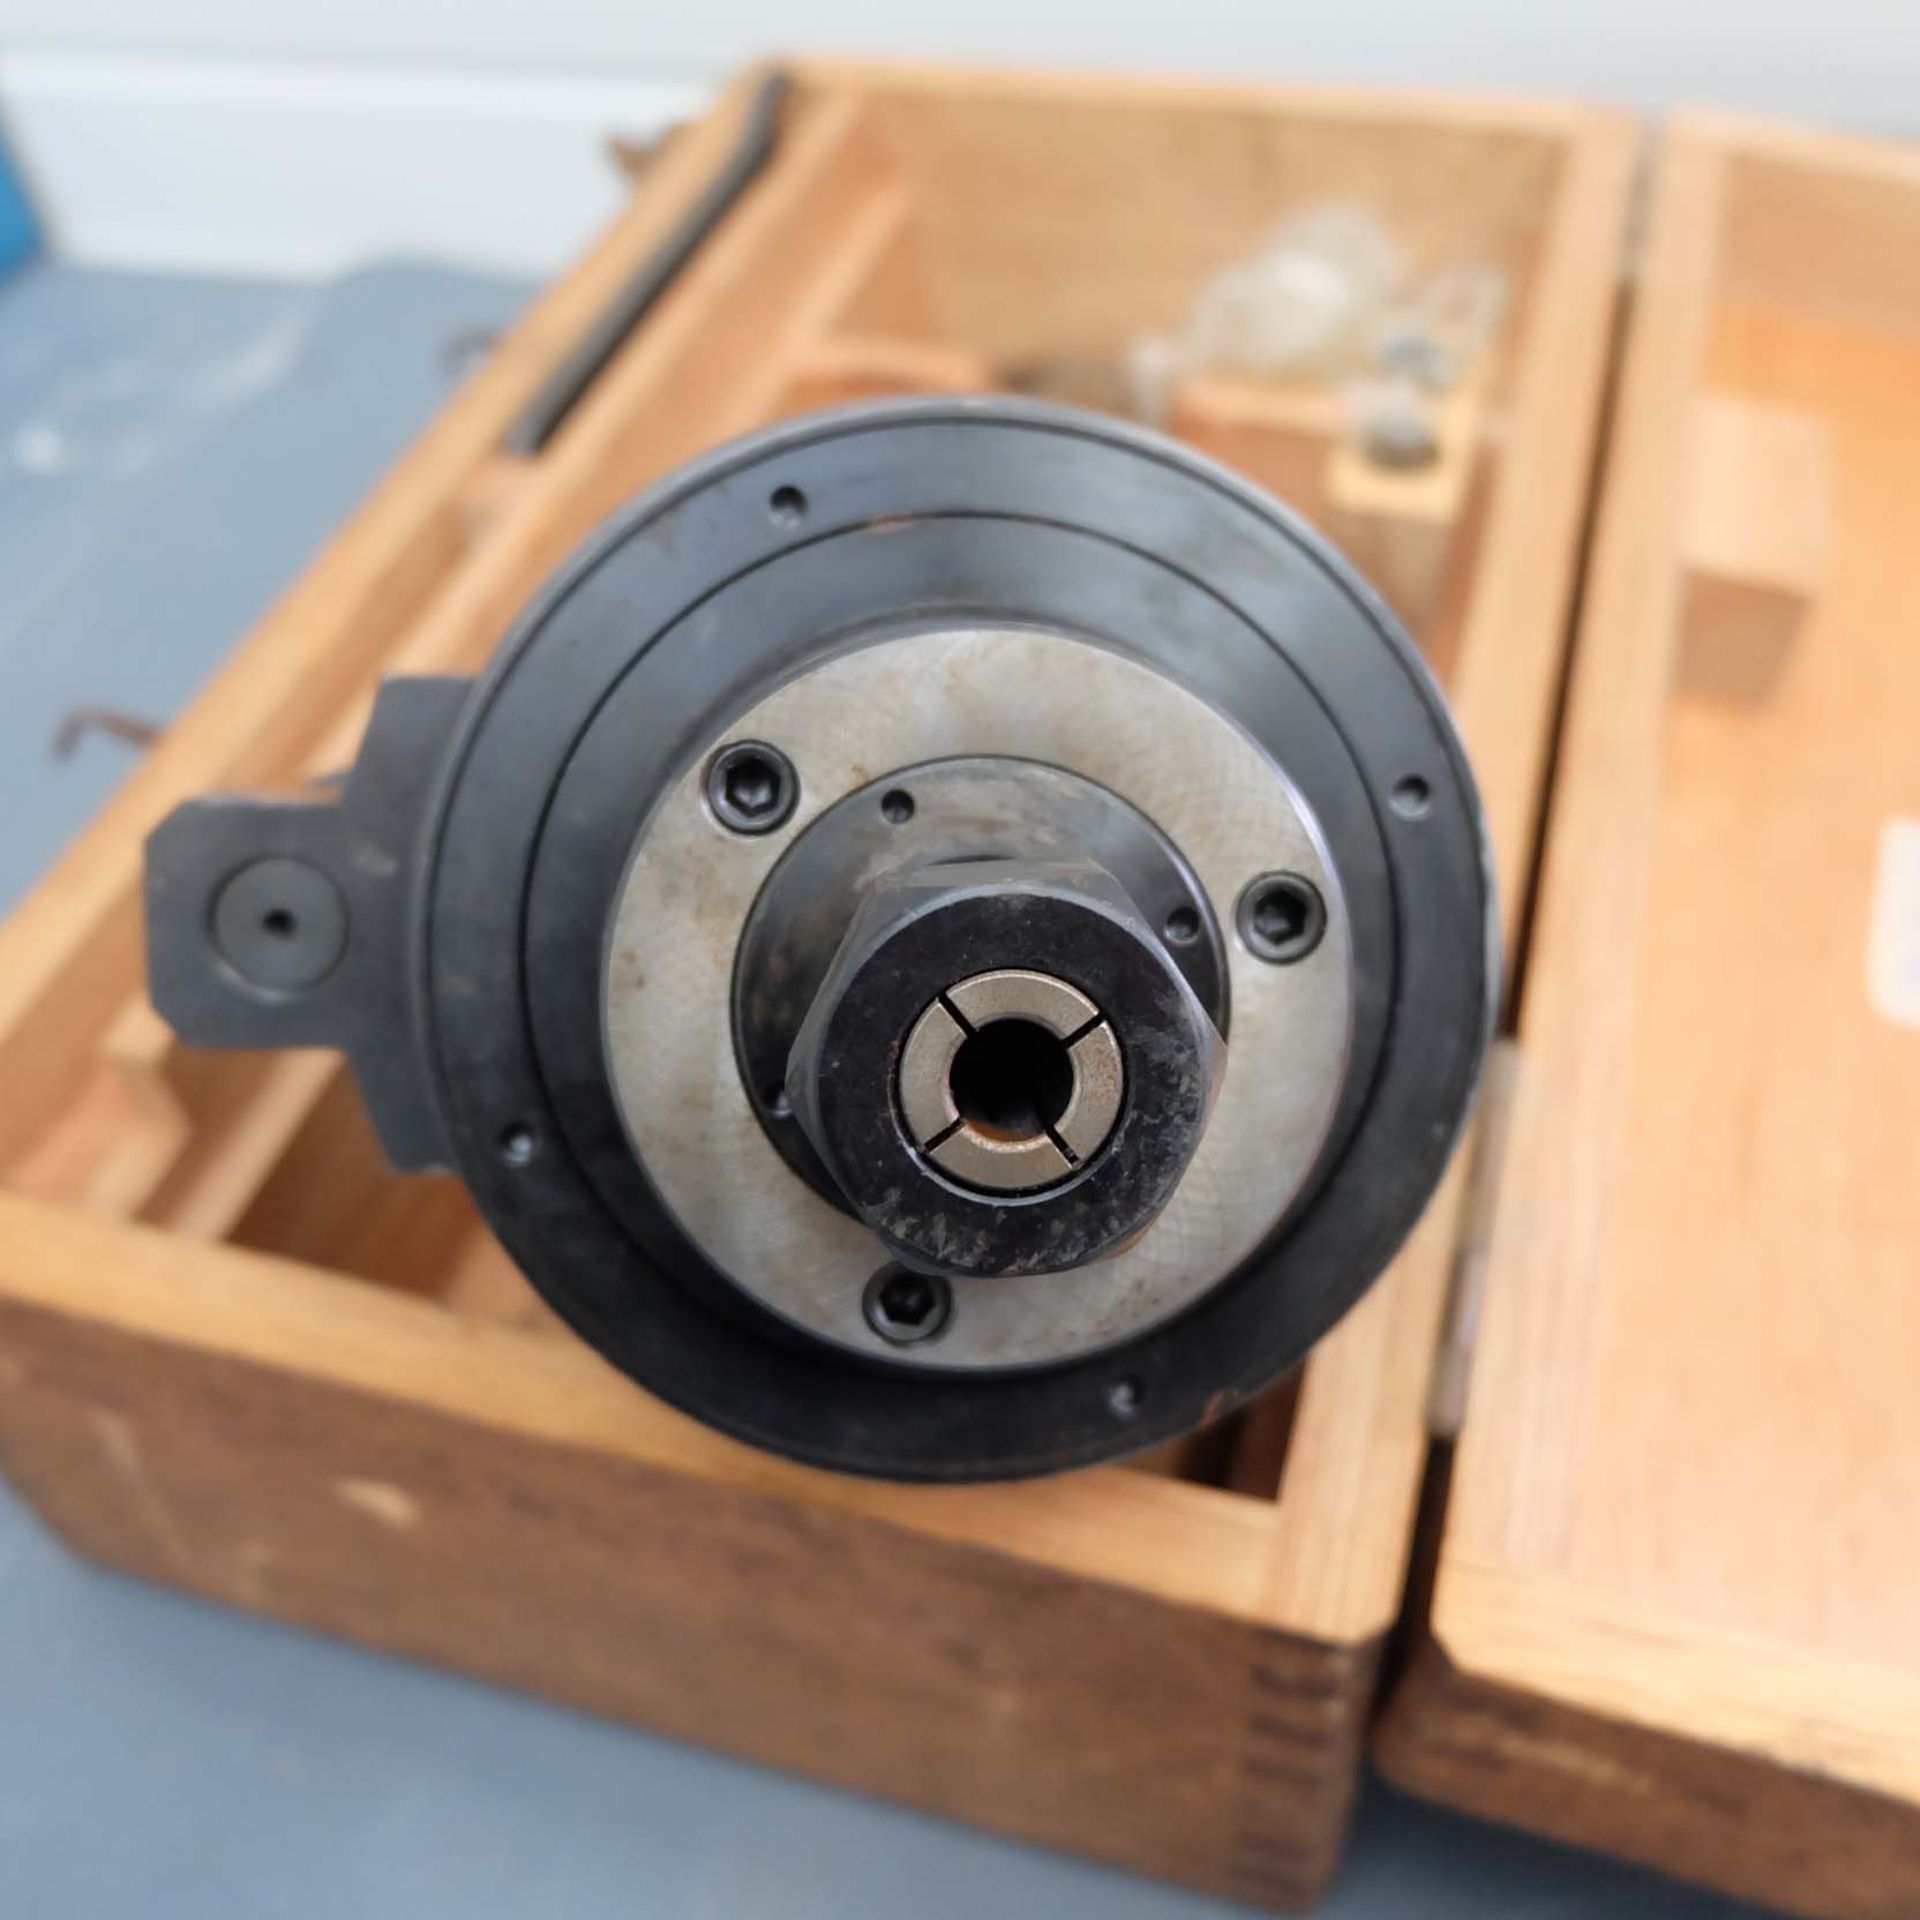 BIG High Spindle Speed Increaser - X4G By Daishower Seiki Co. Ltd With BT 50 Spindle In Wooden Box. - Image 3 of 5